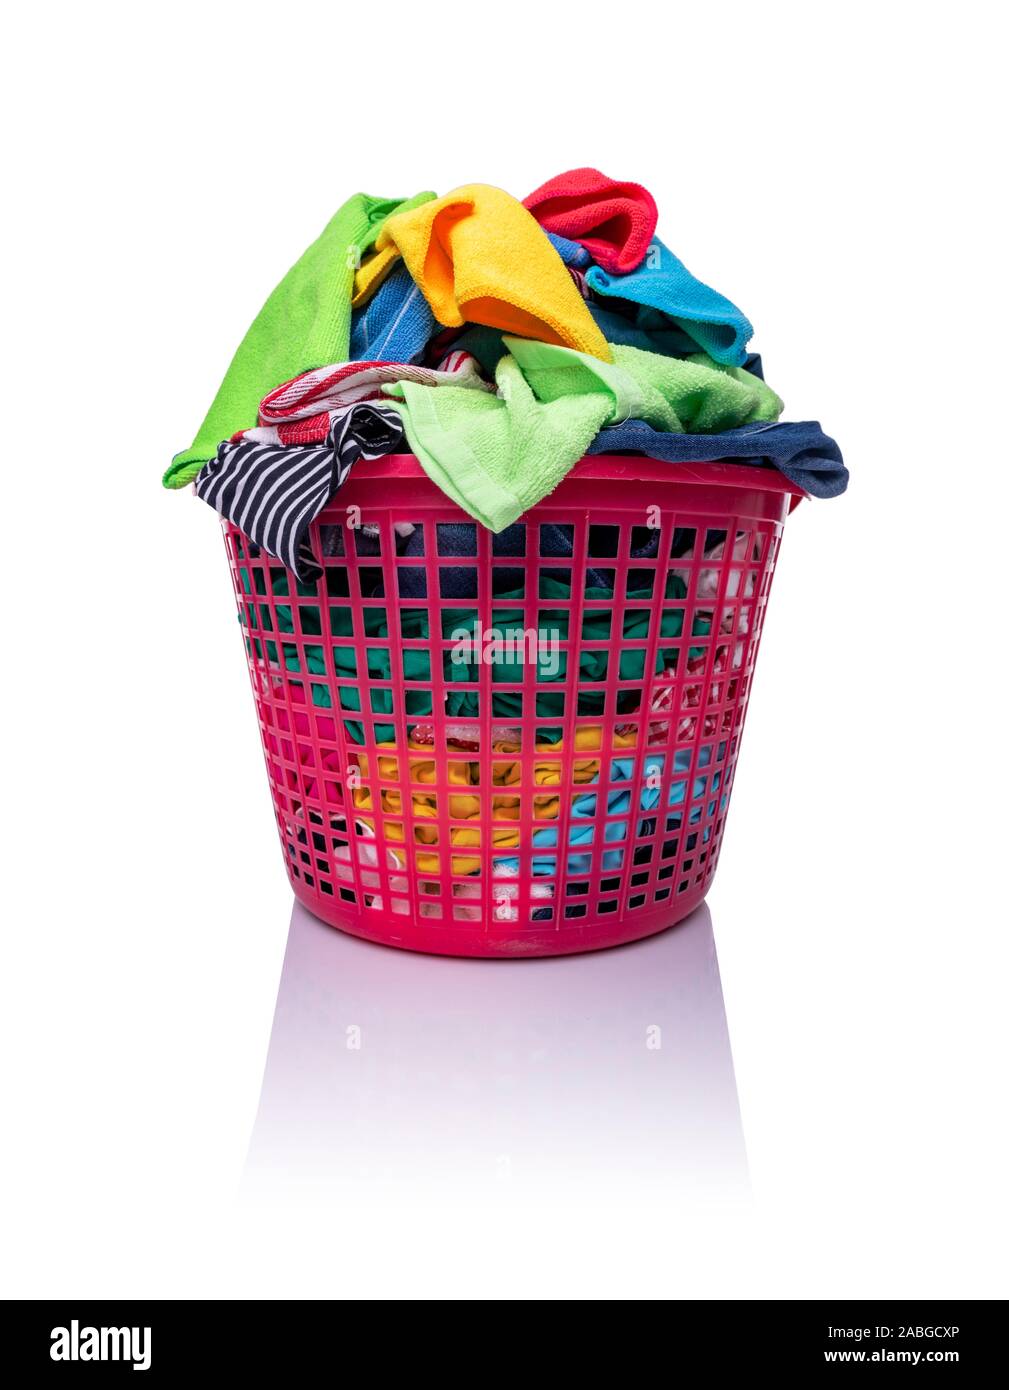 https://c8.alamy.com/comp/2ABGCXP/a-basket-with-laundry-on-a-white-background-2ABGCXP.jpg